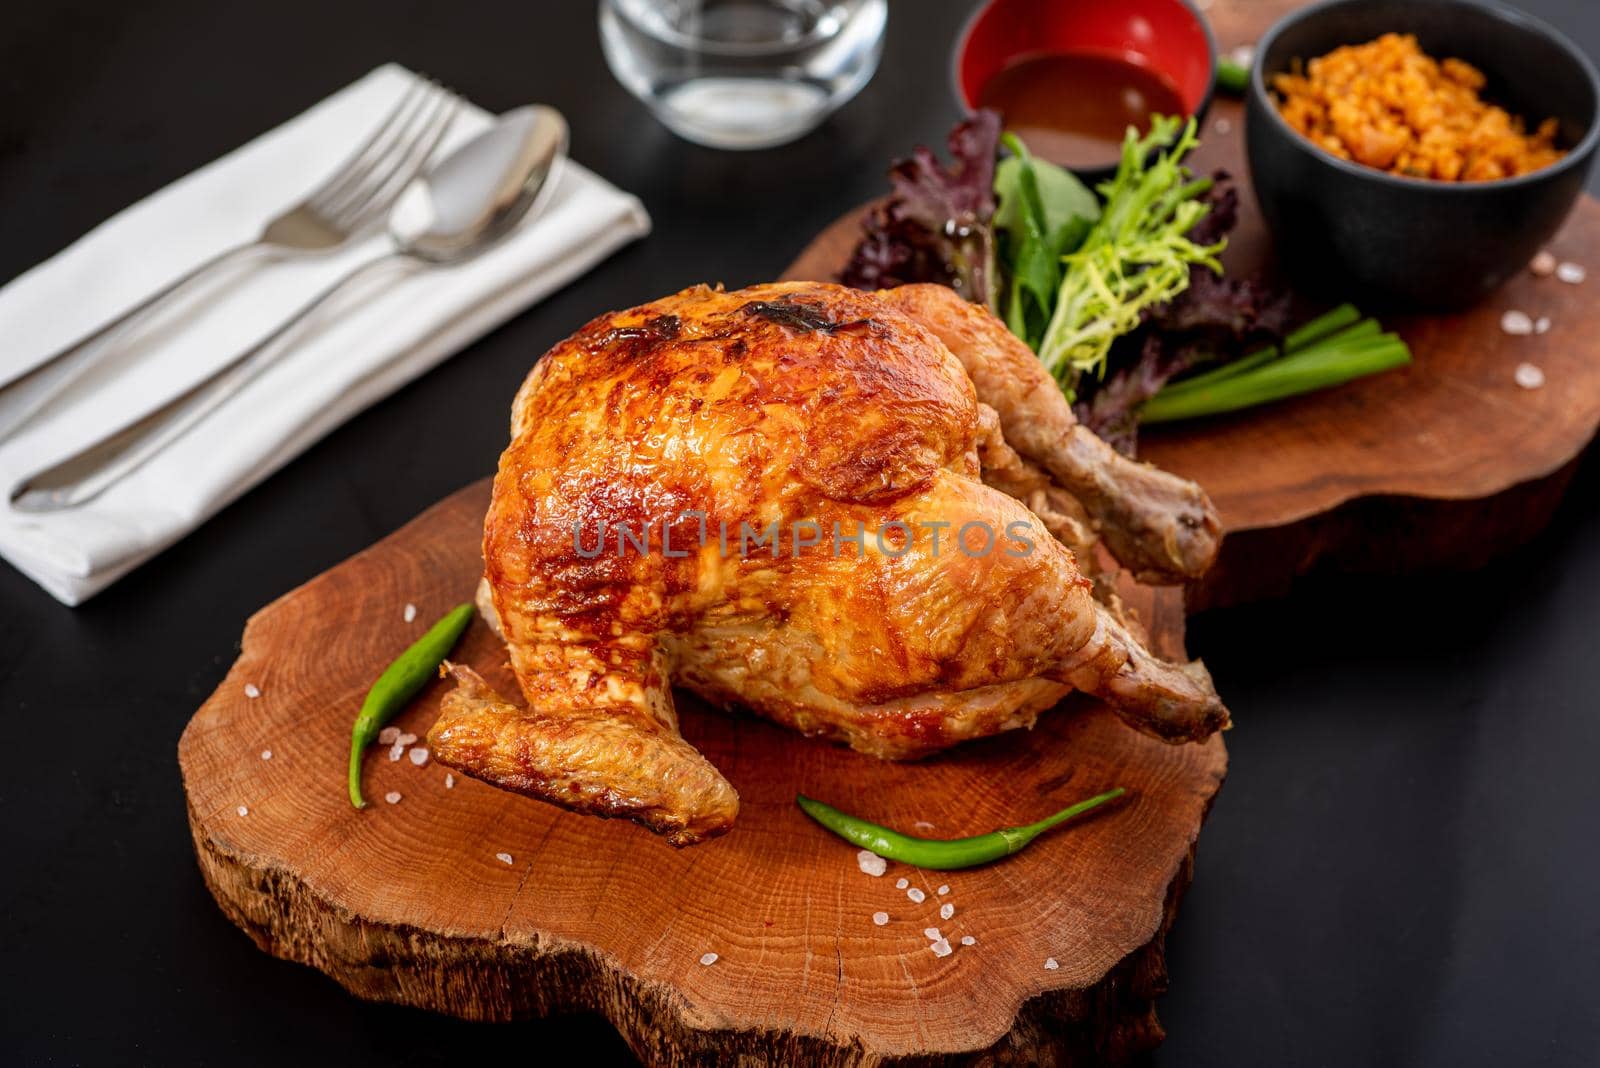 Roasted whole chicken cooked on charcoal with bulgur pilaf on wooden board.